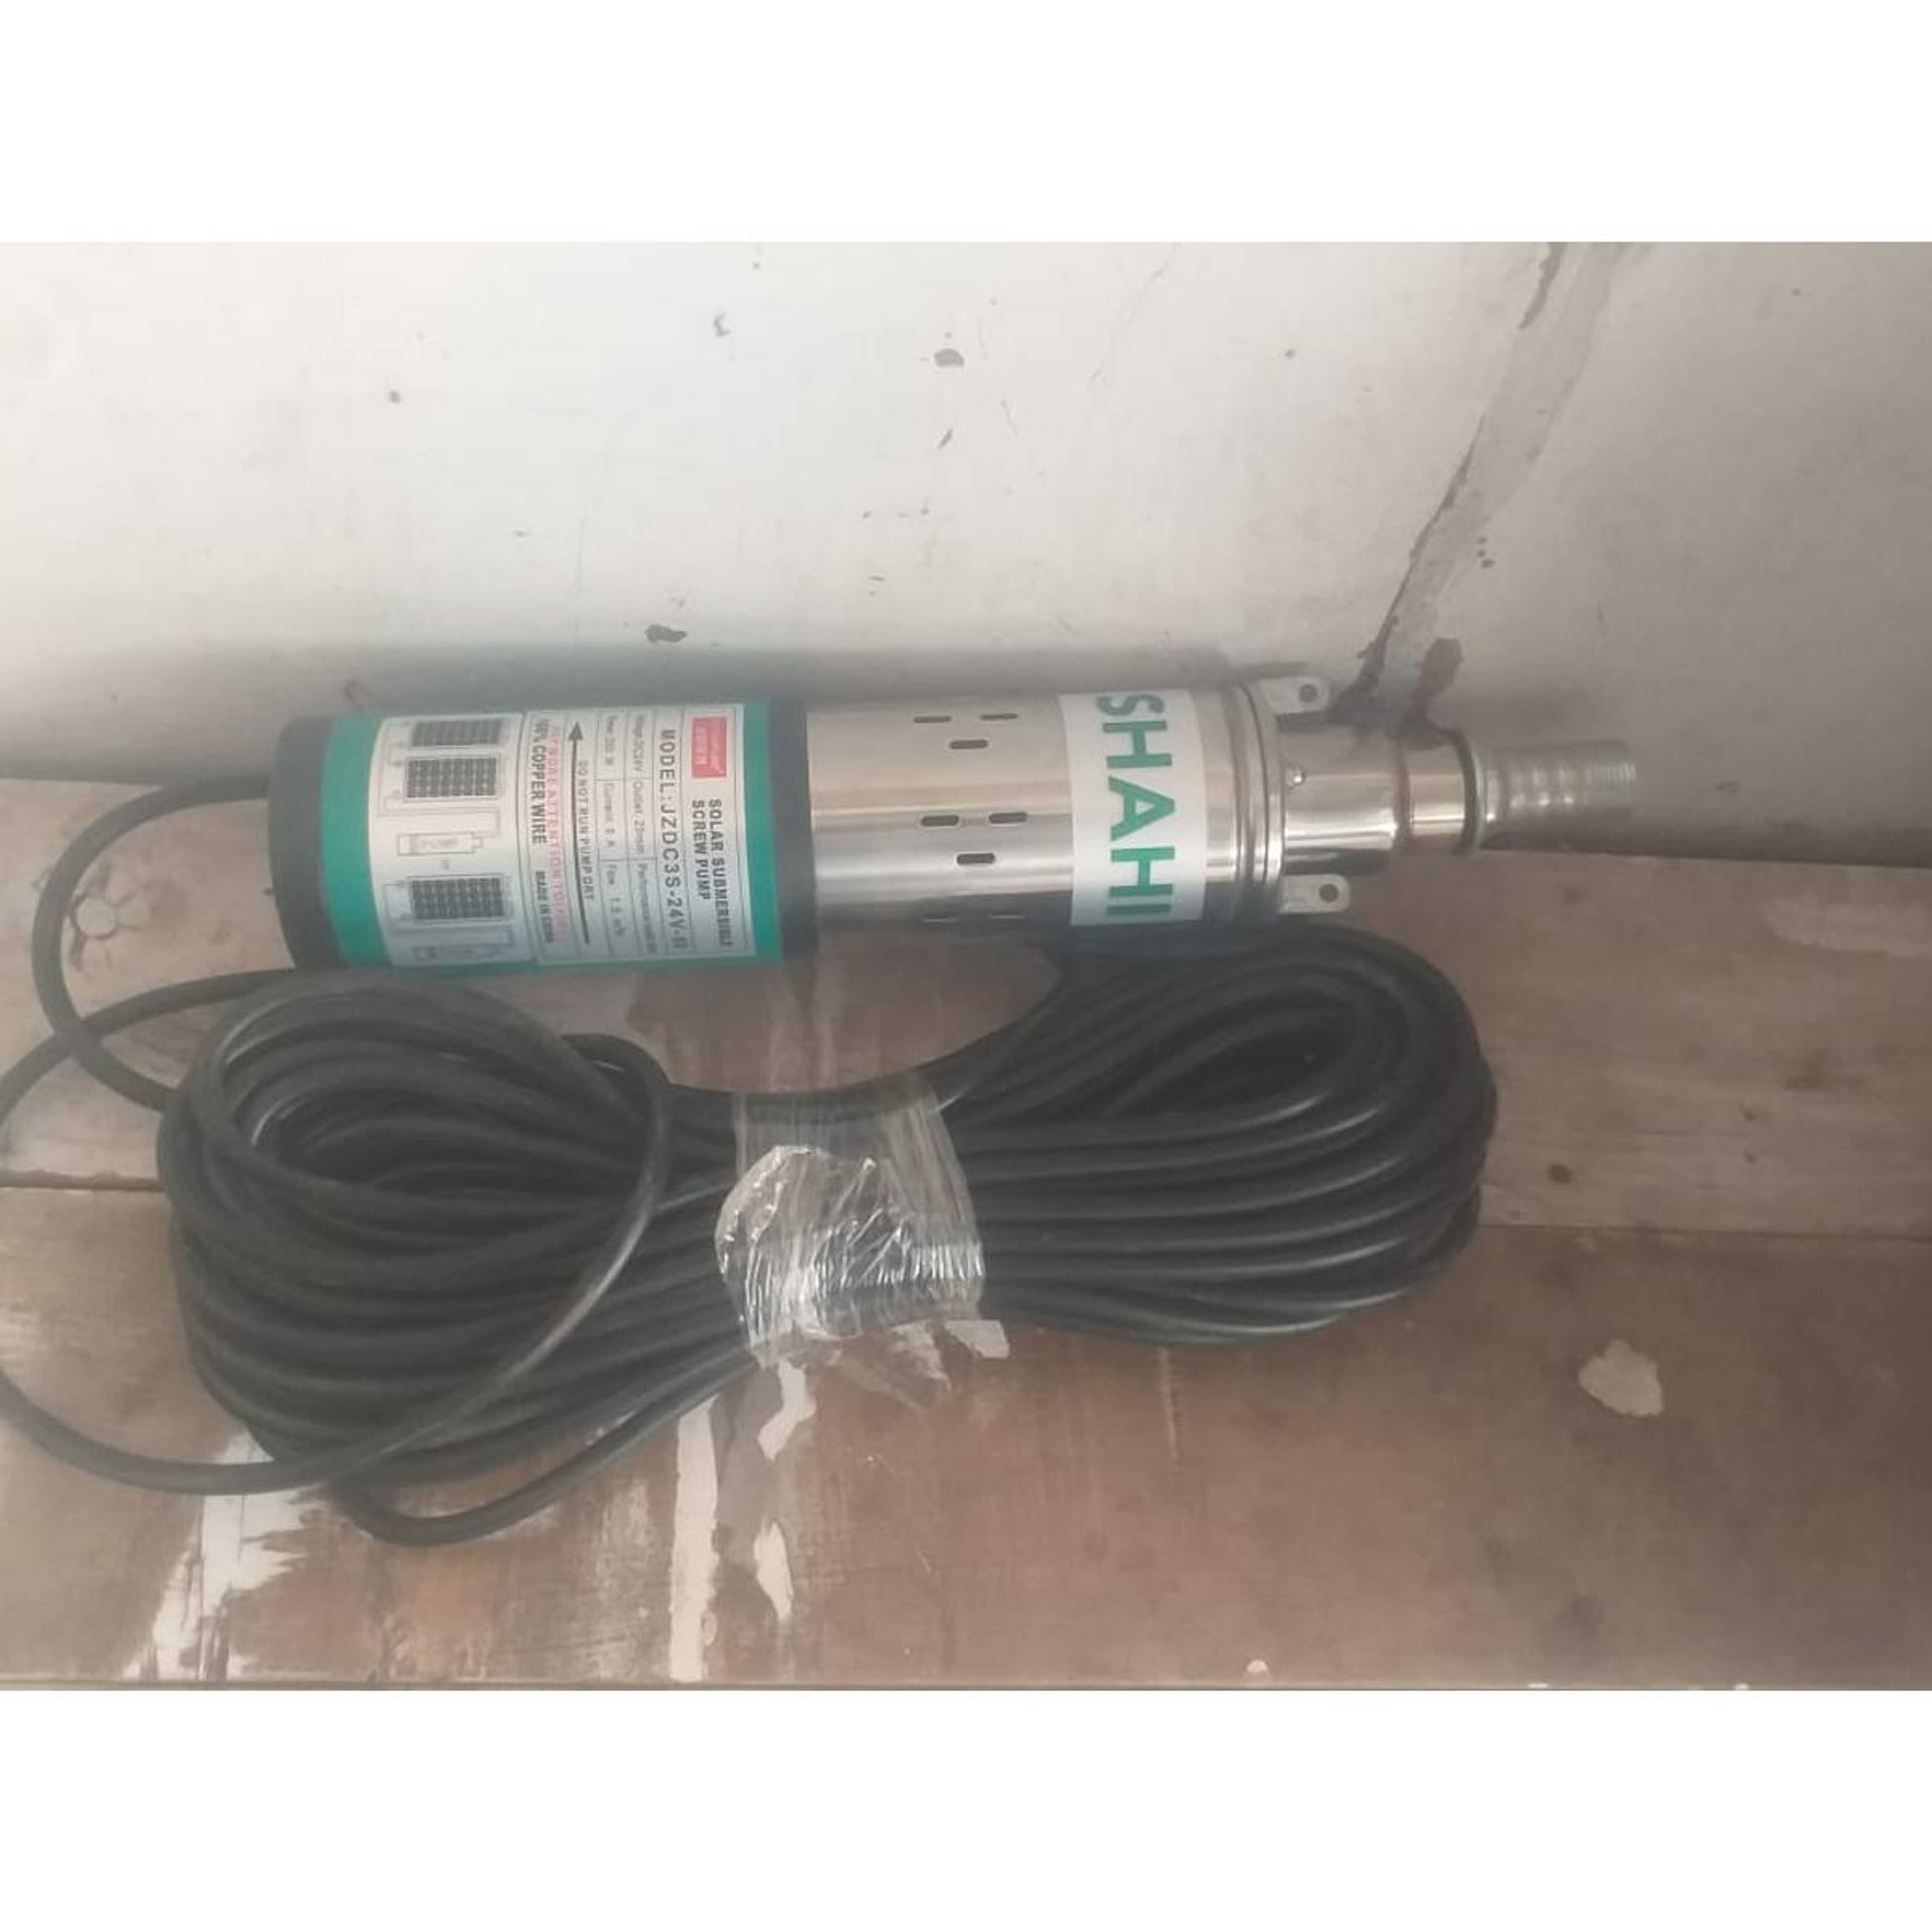 Water Pump 99.99% Copper Solar Submersible Screw pump with Cable.  24V 250Watt DC Battery